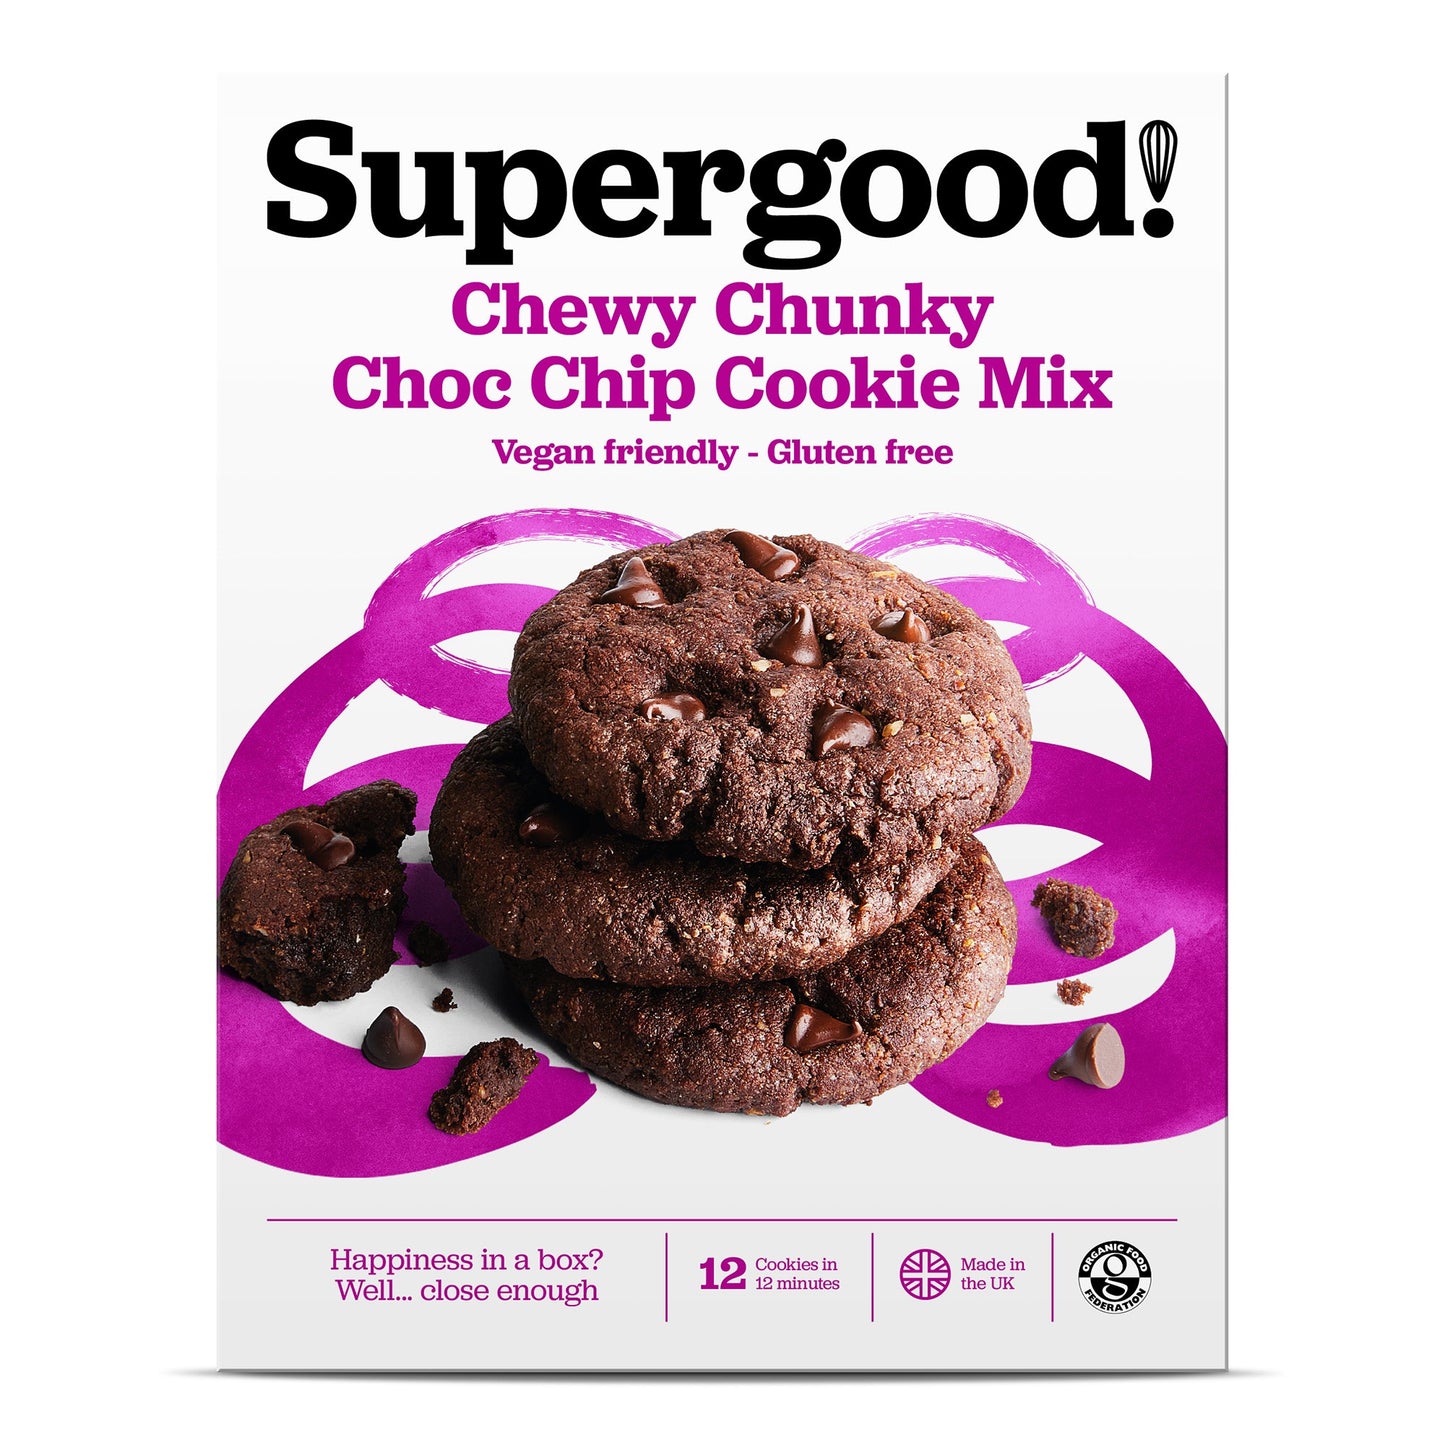 Chewy Chunky Choc Chip Cookie Mix - Bake Vegan & Gluten-Free Cookies in Minutes